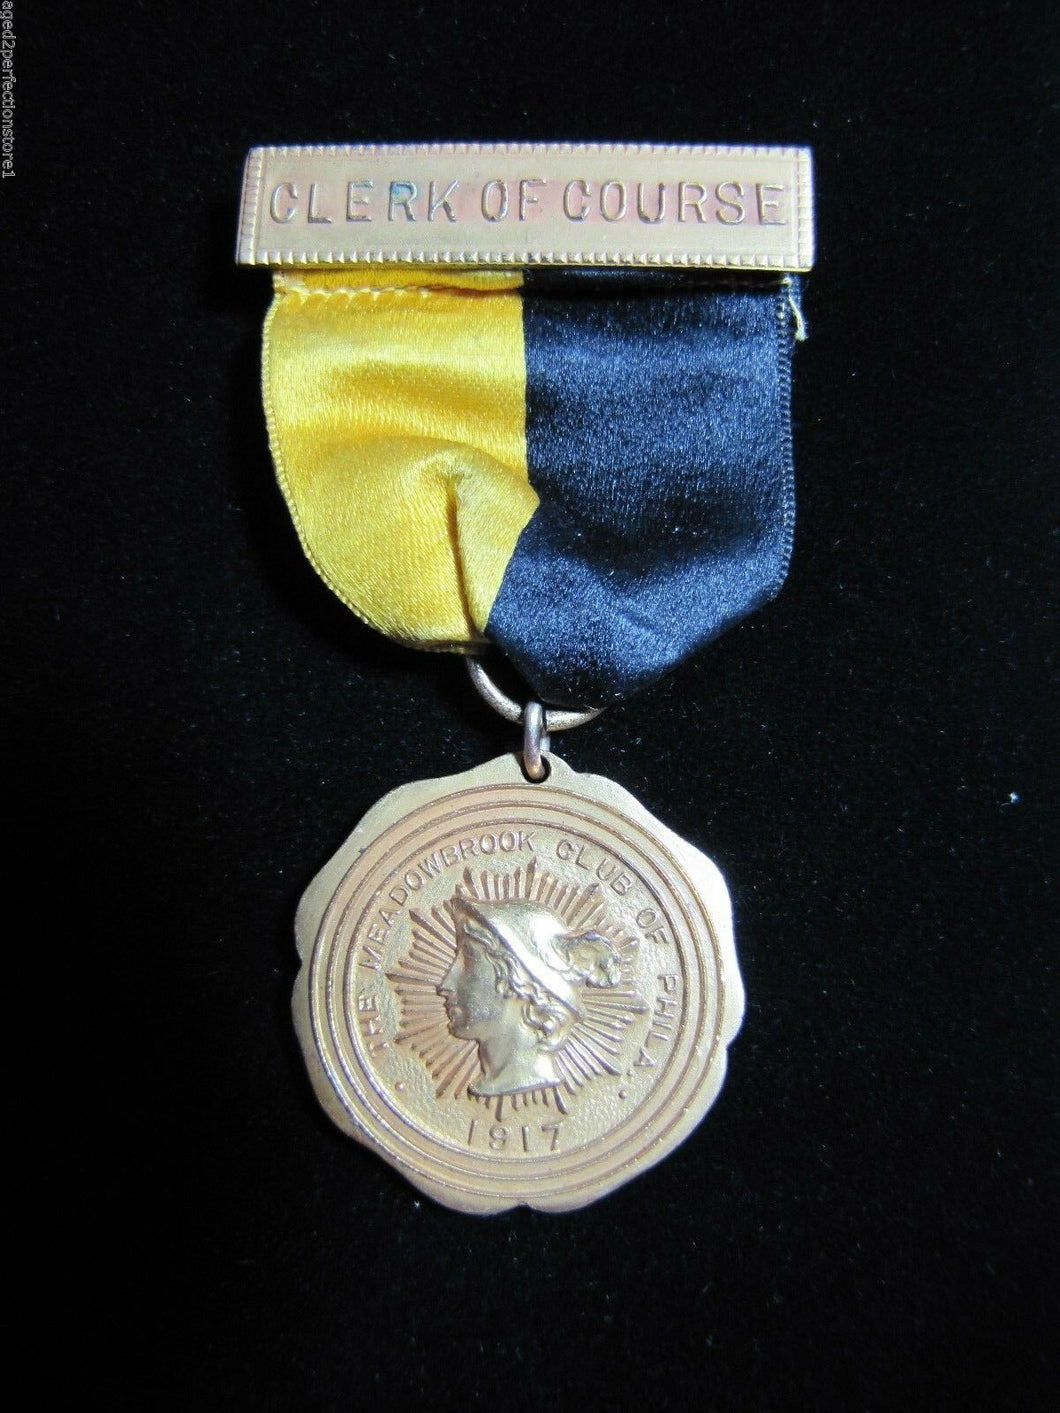 1917 MEADOWBROOK CLUB of PHILA Sports Medallion CLERK OF COURSE Robbins Co